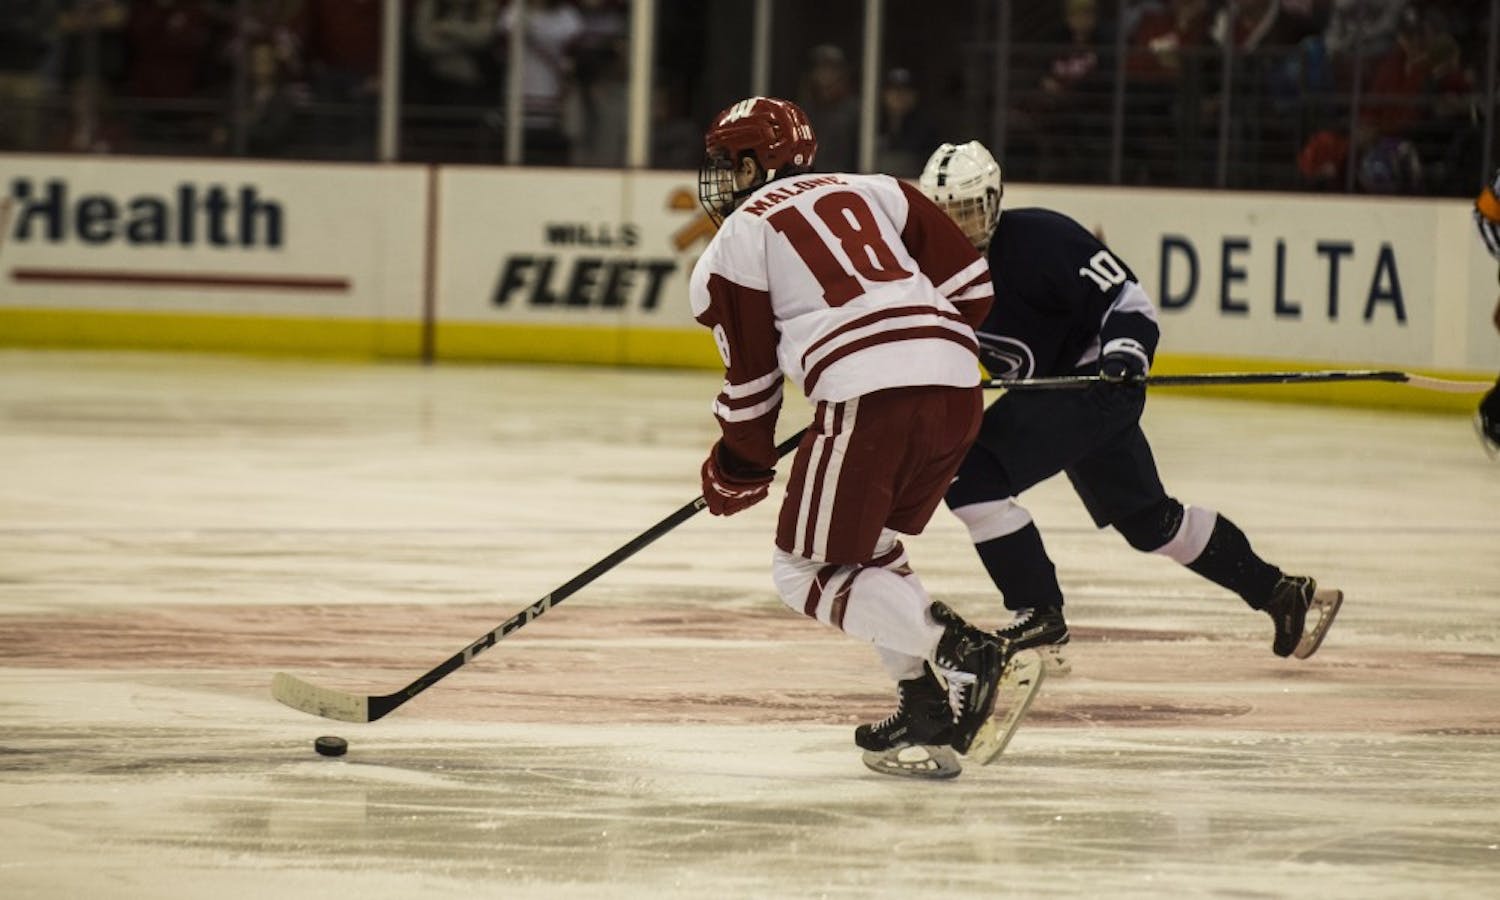 Seamus Malone tallied the opening goal against Michigan Tech, but it wasn't enough as the Badgers allowed too many penalties, and goals, to give themselves a chance at the win.